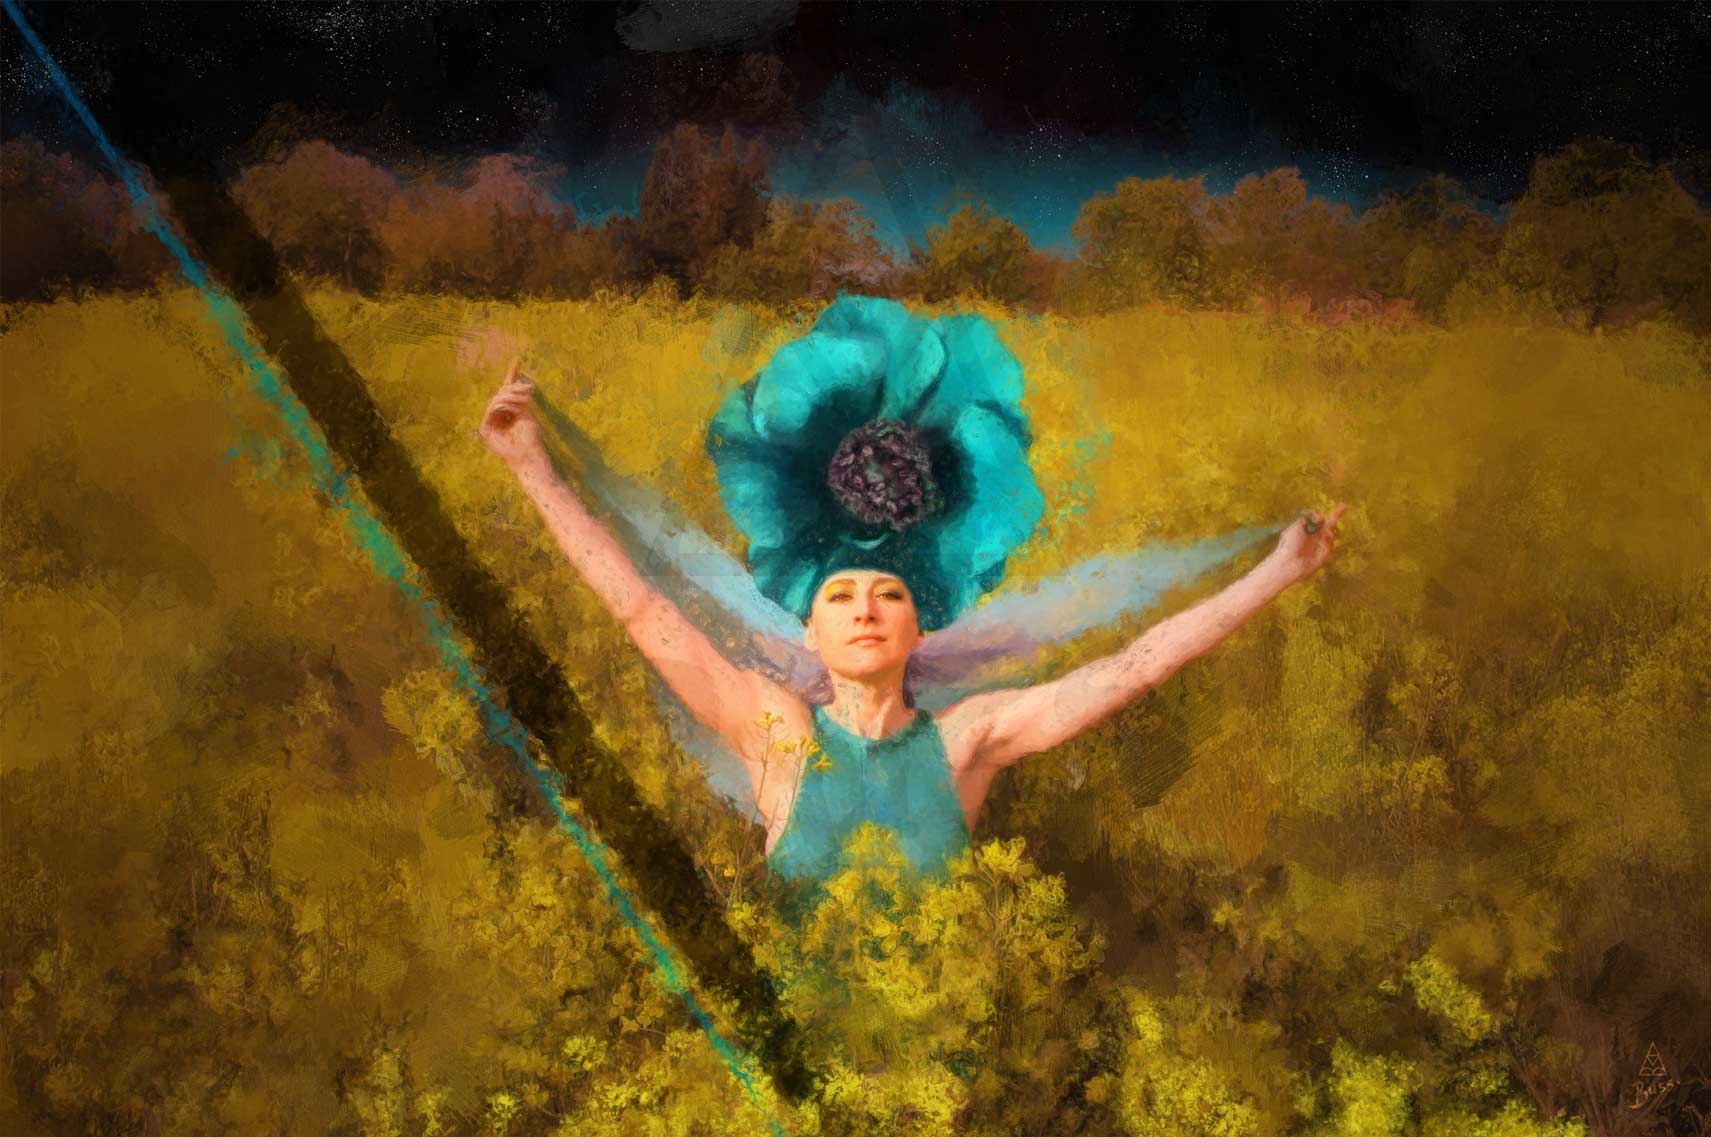 Painting of girl with a Blue Poppy Headdress, Busby Berkeley, Technicolor, Digital Painting by Anna-Marie Buss